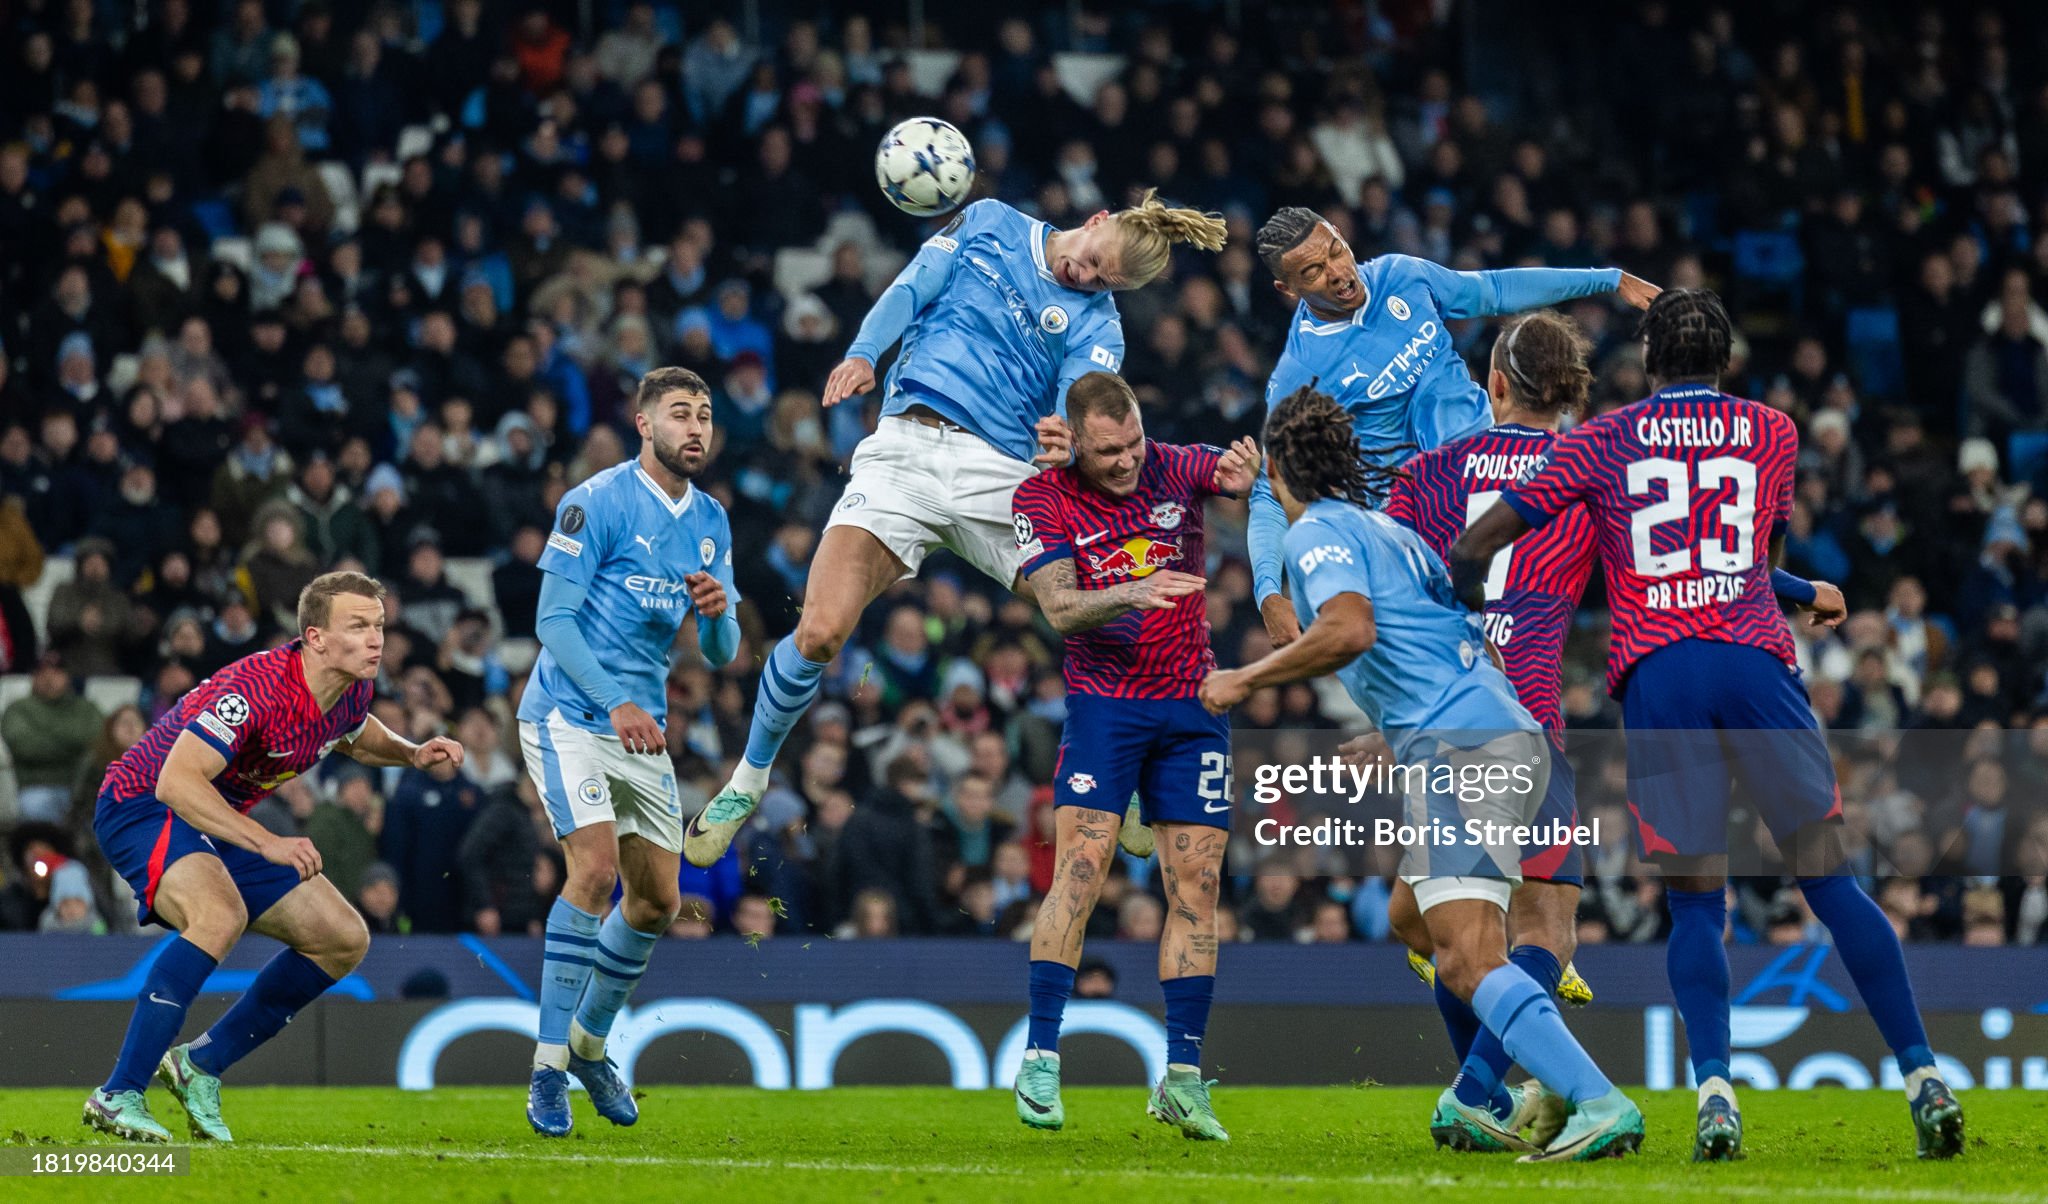 Manchester City completely turns it around after a phenomenal first half by Openda; Simons gets injured